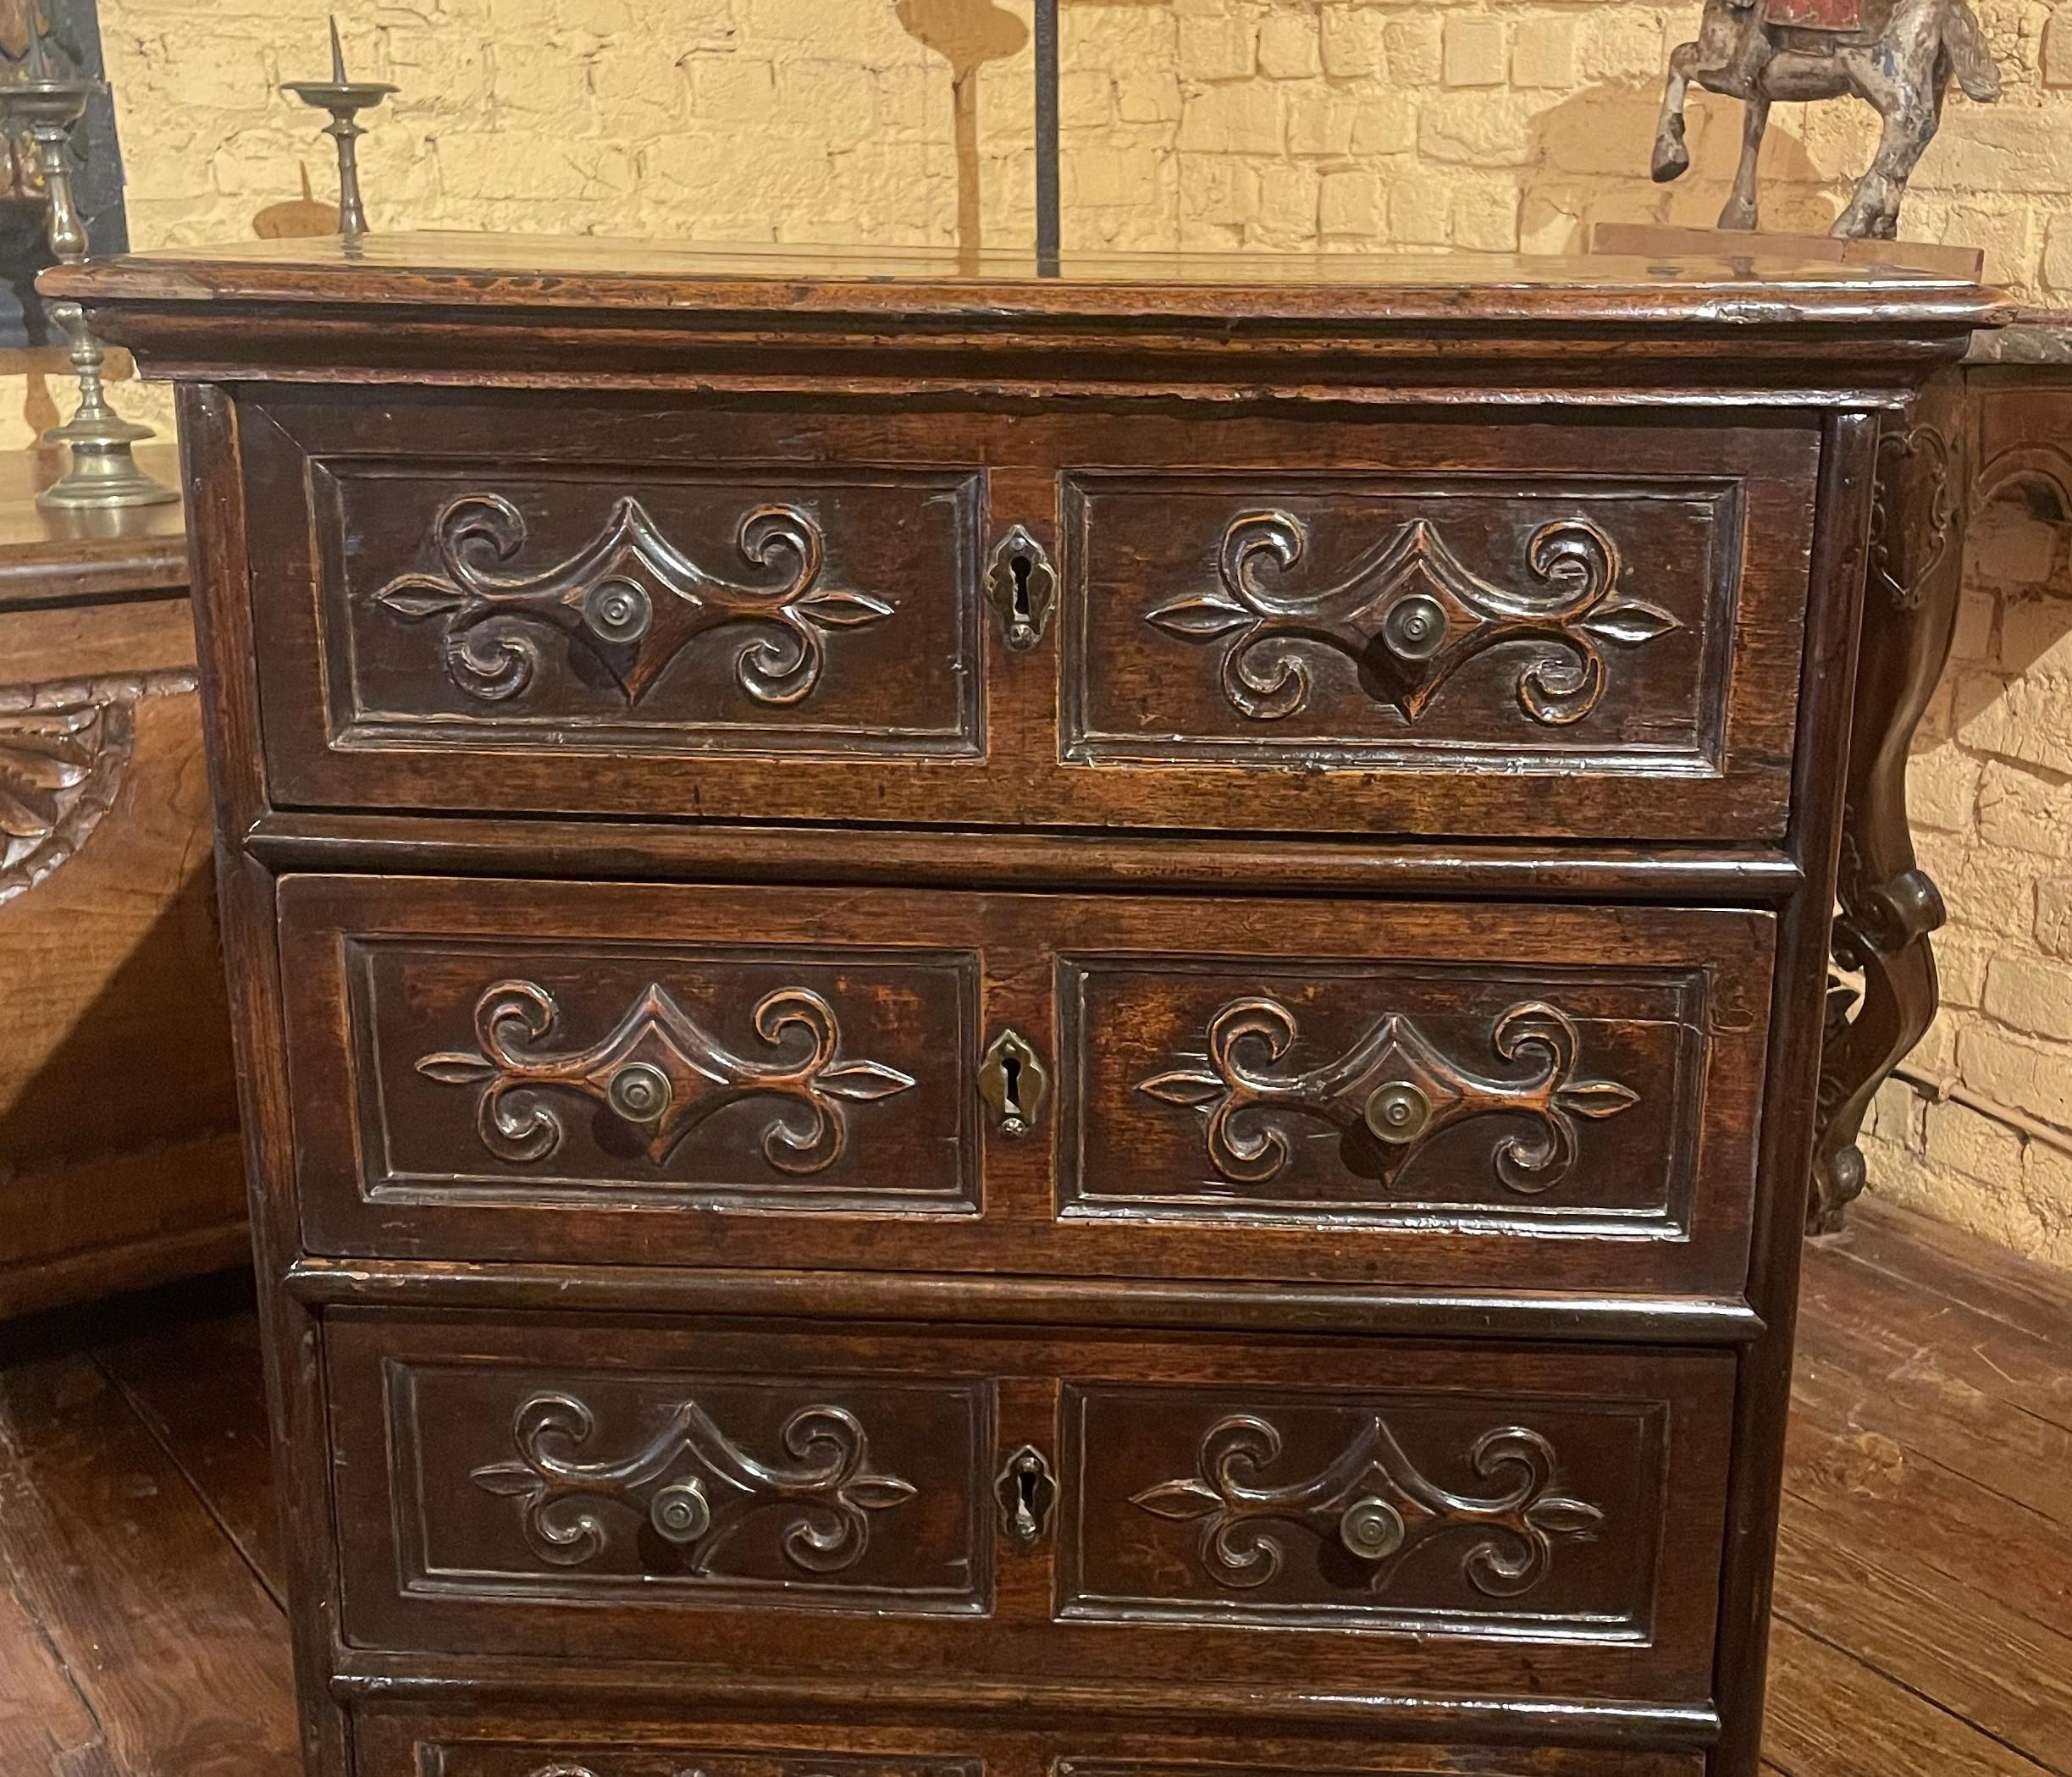 lovely little chest of drawers in walnut from the Italian Renaissance - 17th century

Very beautiful chest of drawers made up of 4 drawers. They each have their original locks which are very good quality.
Very beautiful sculpture work on the